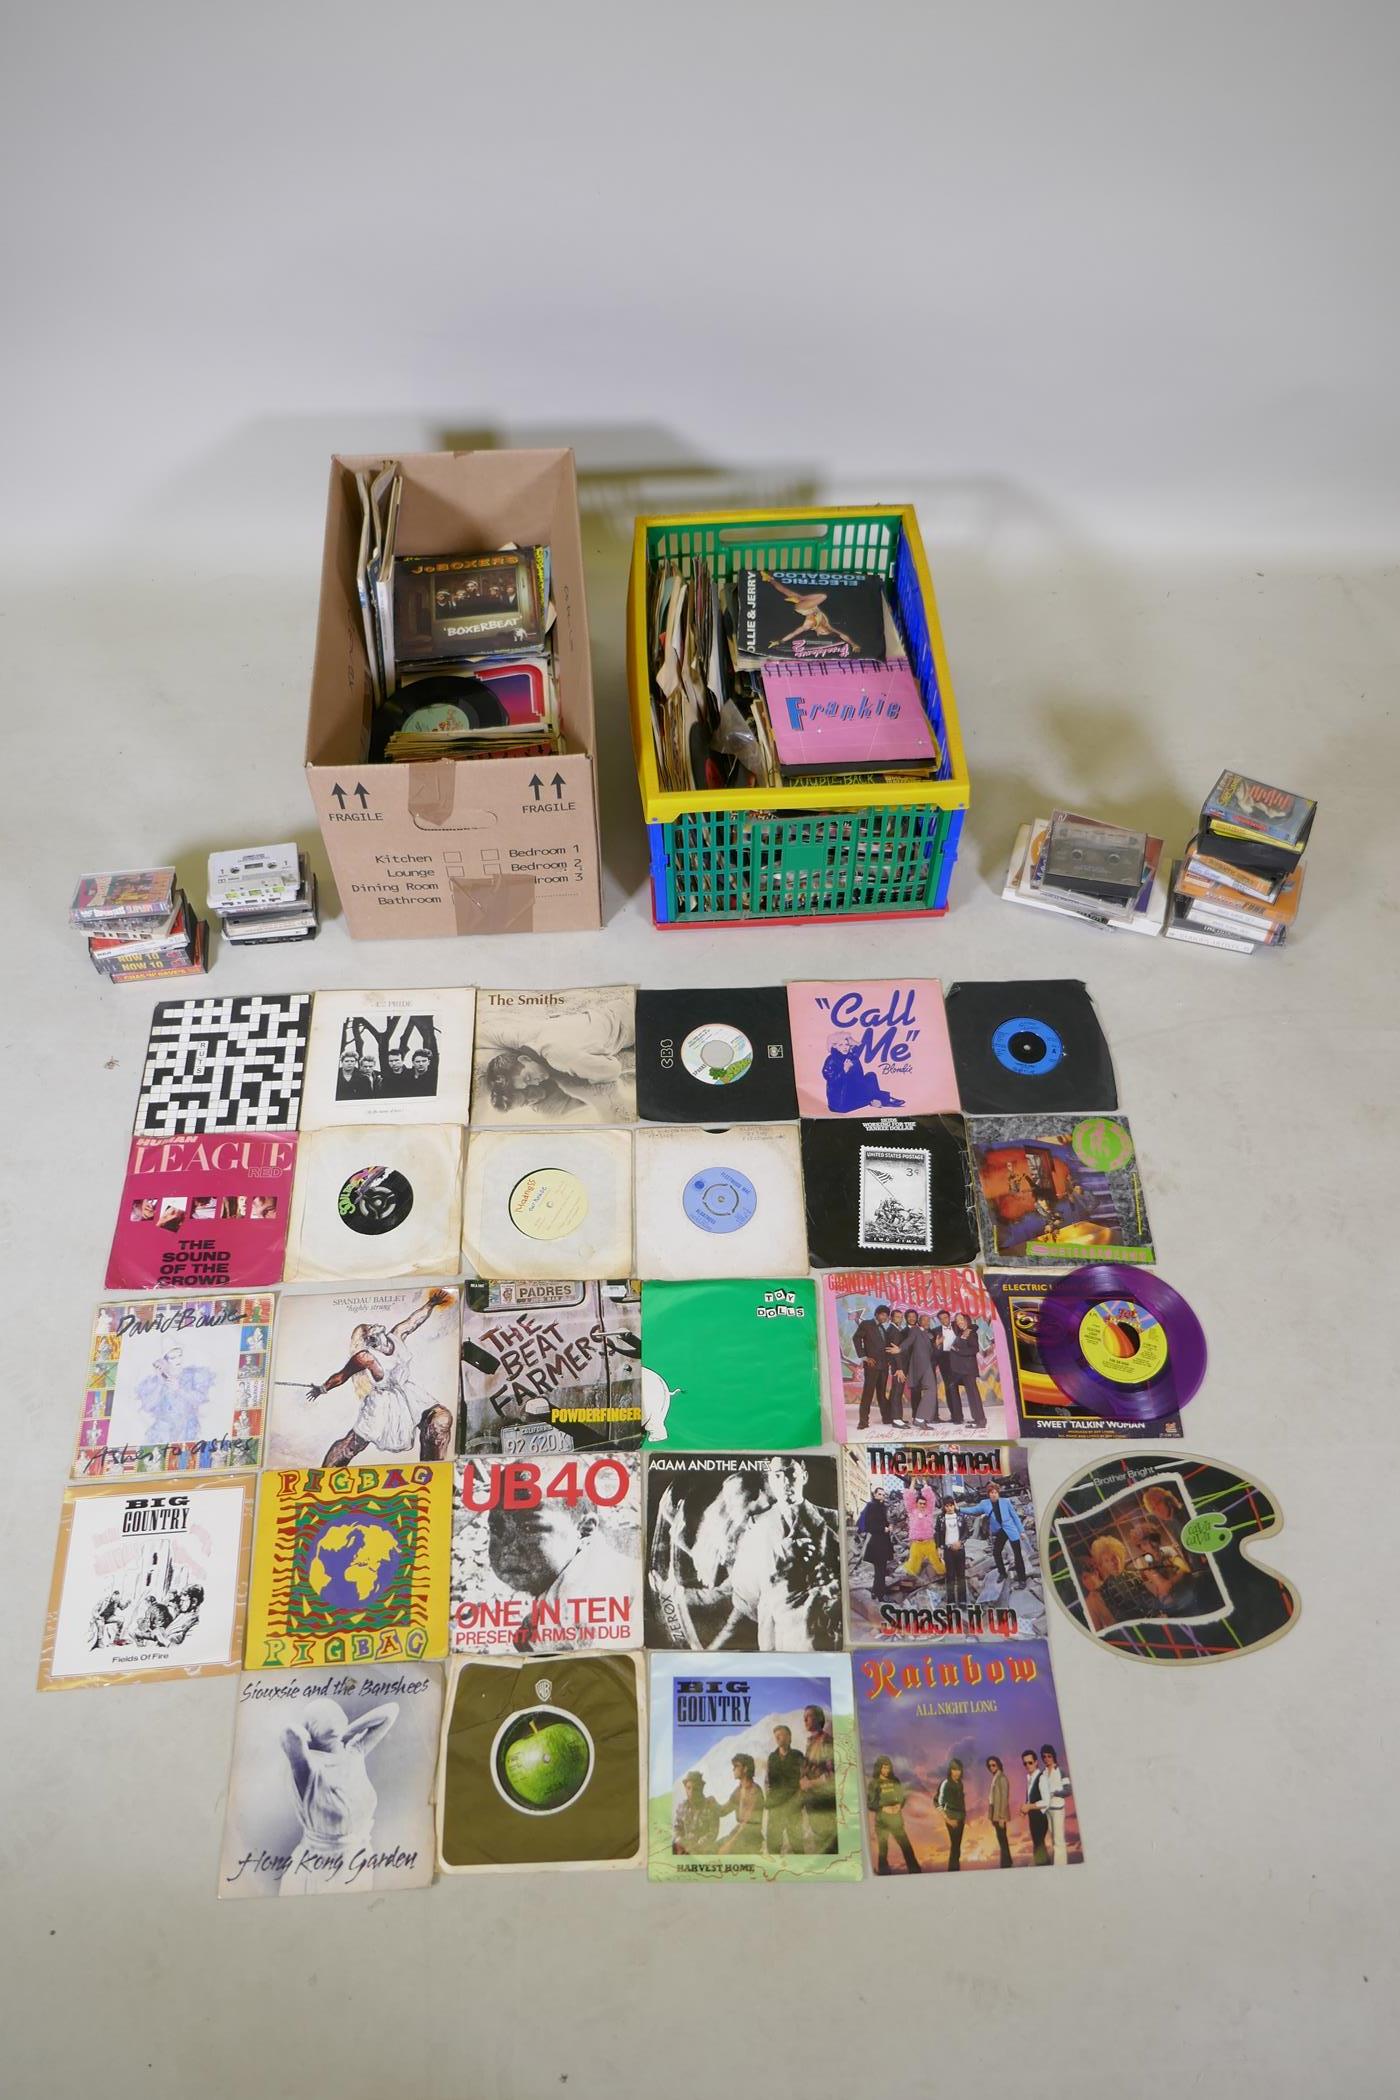 A large quantity of vintage 7" singles and cassette tapes, including The Smiths, Sparks, Blondie,